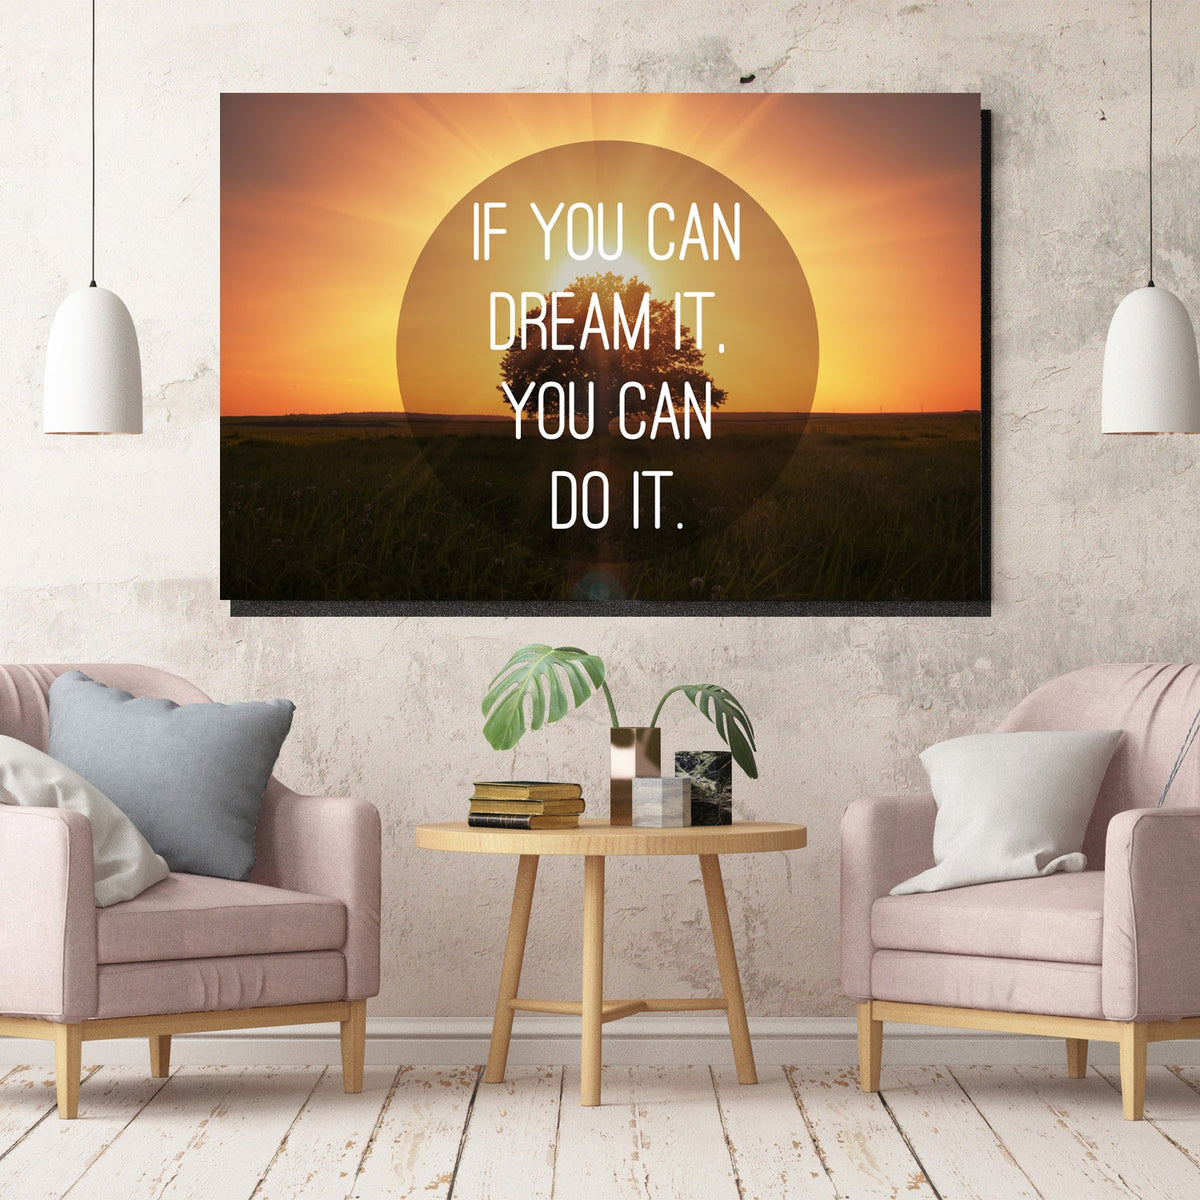 https://cdn.shopify.com/s/files/1/0387/9986/8044/products/DreamCanvasArtprintStretched-2.jpg